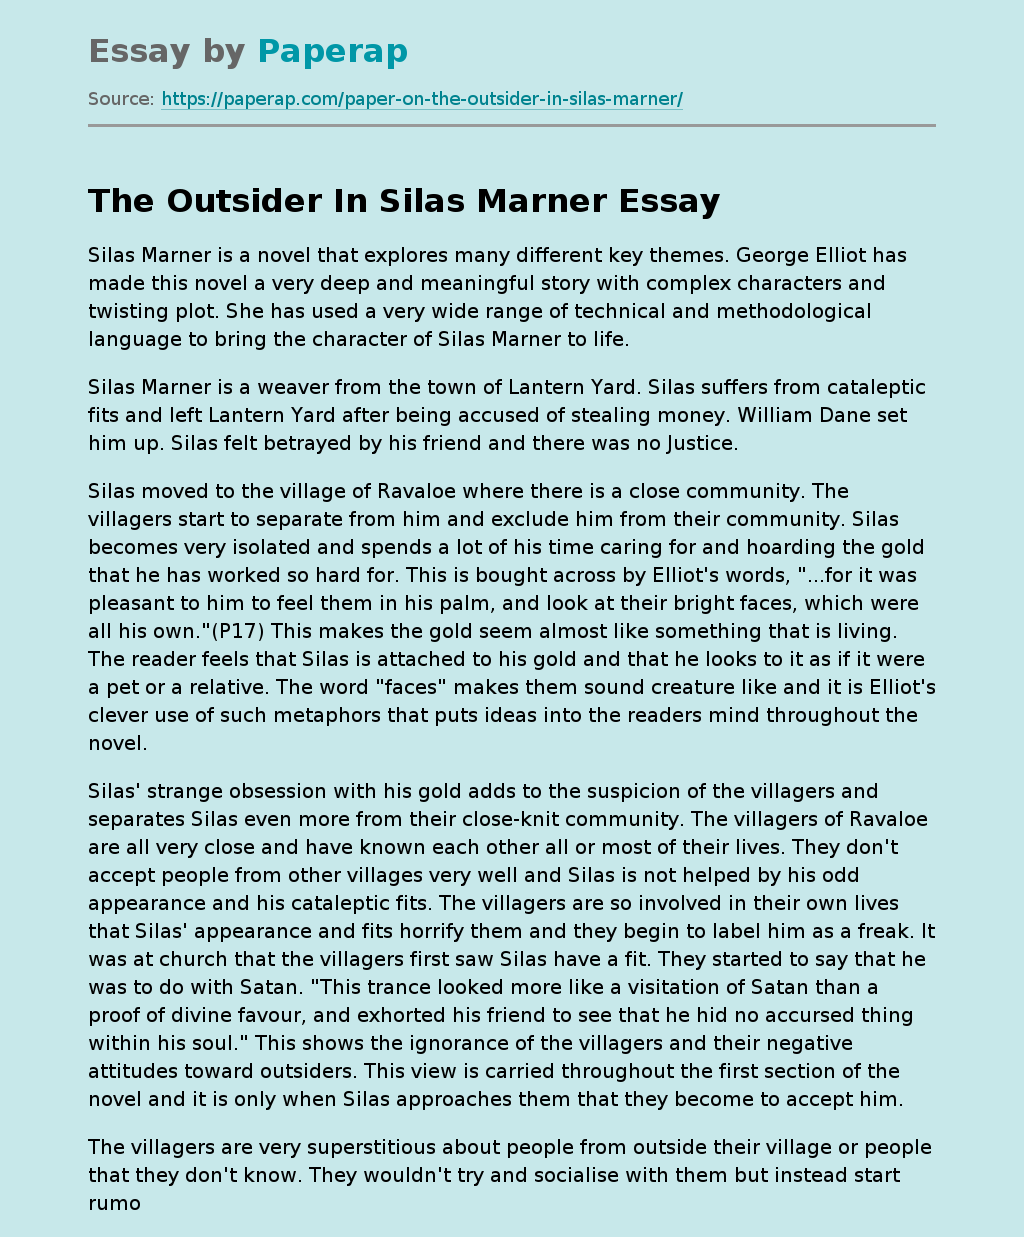 The Outsider In Silas Marner